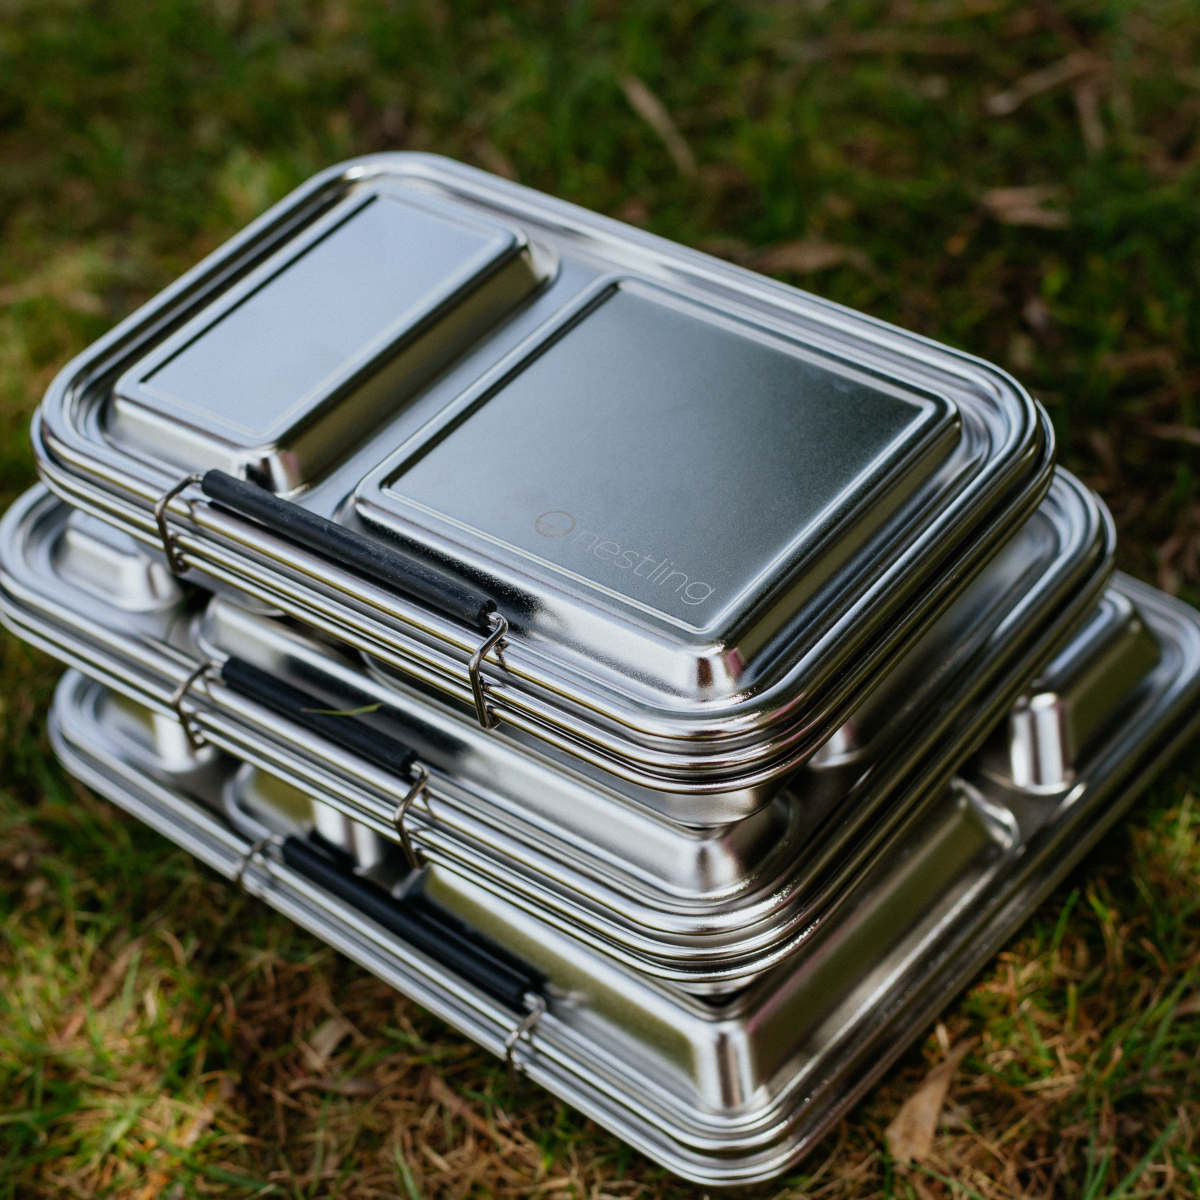 Stainless Steel Lunchboxes